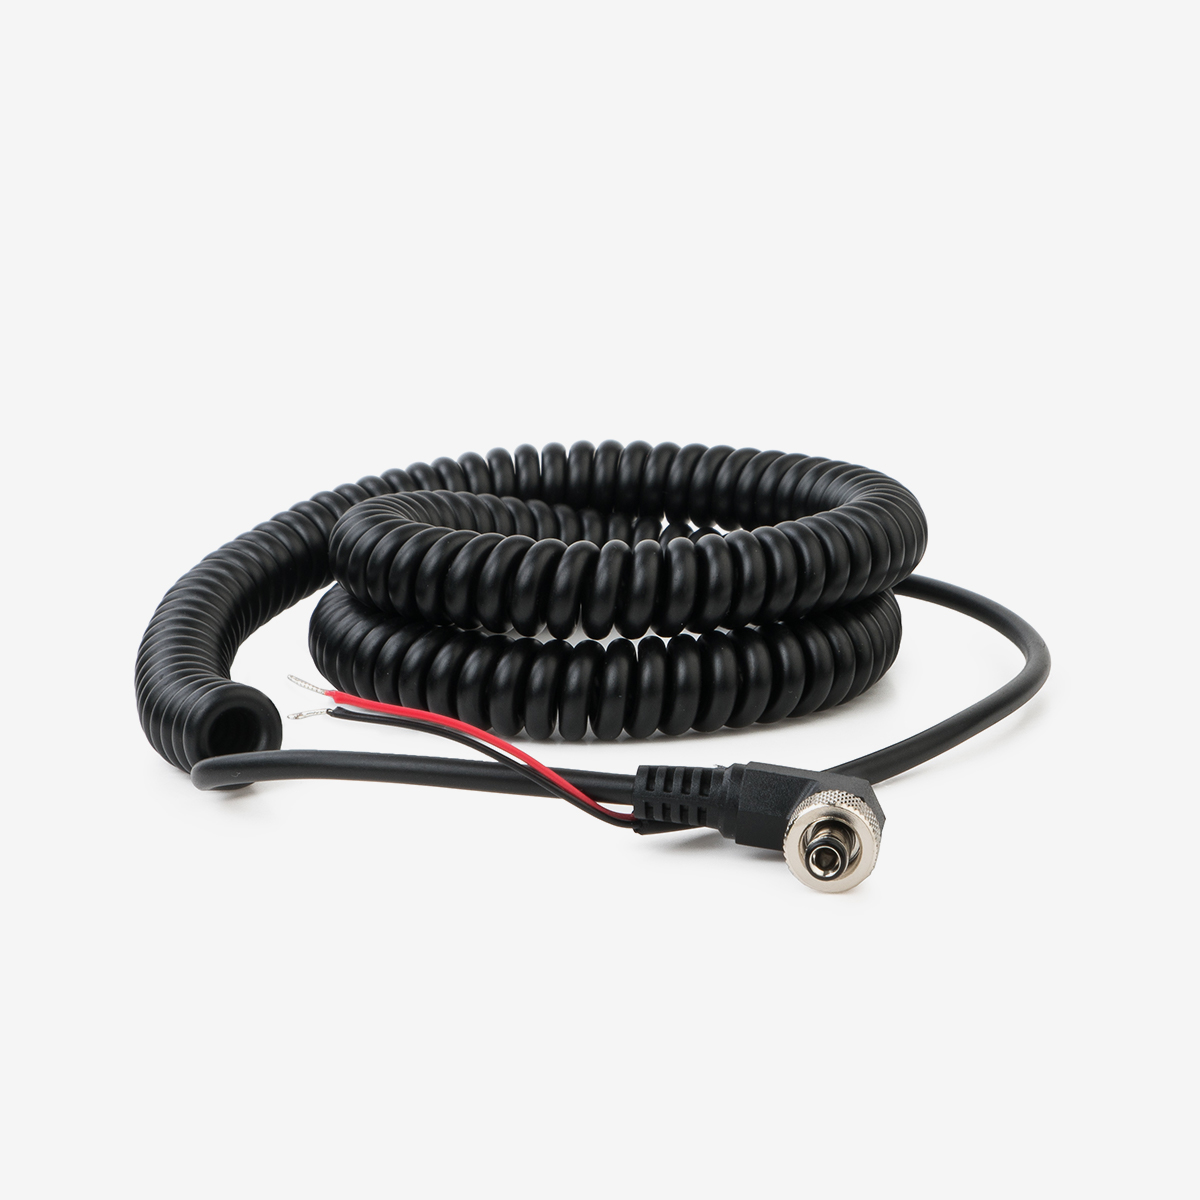 Black coiled OM-25 analyzer cable